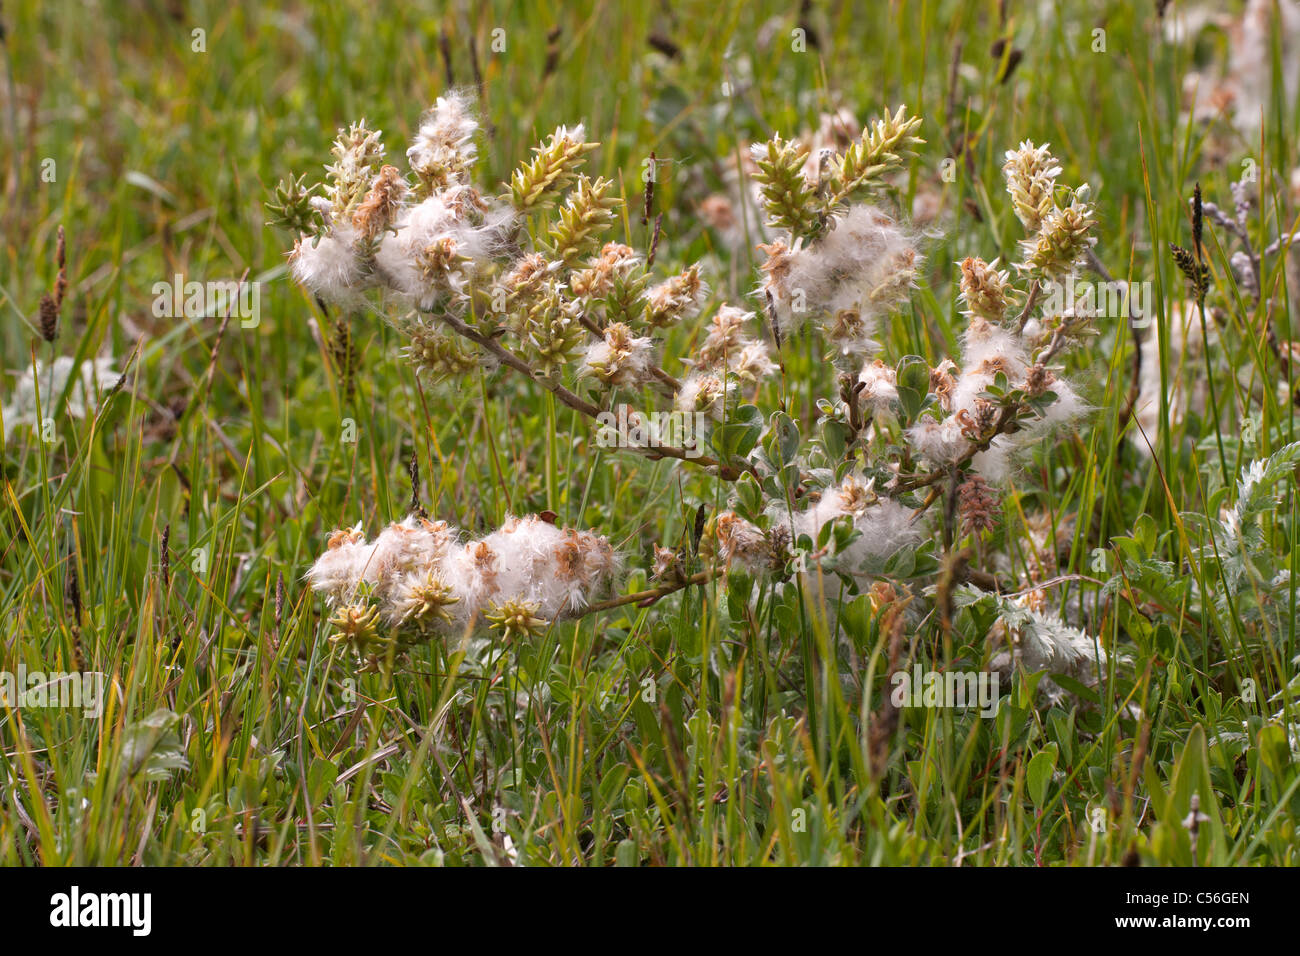 Dwarf Willow Salix herbacea showing flowers and seeds Stock Photo